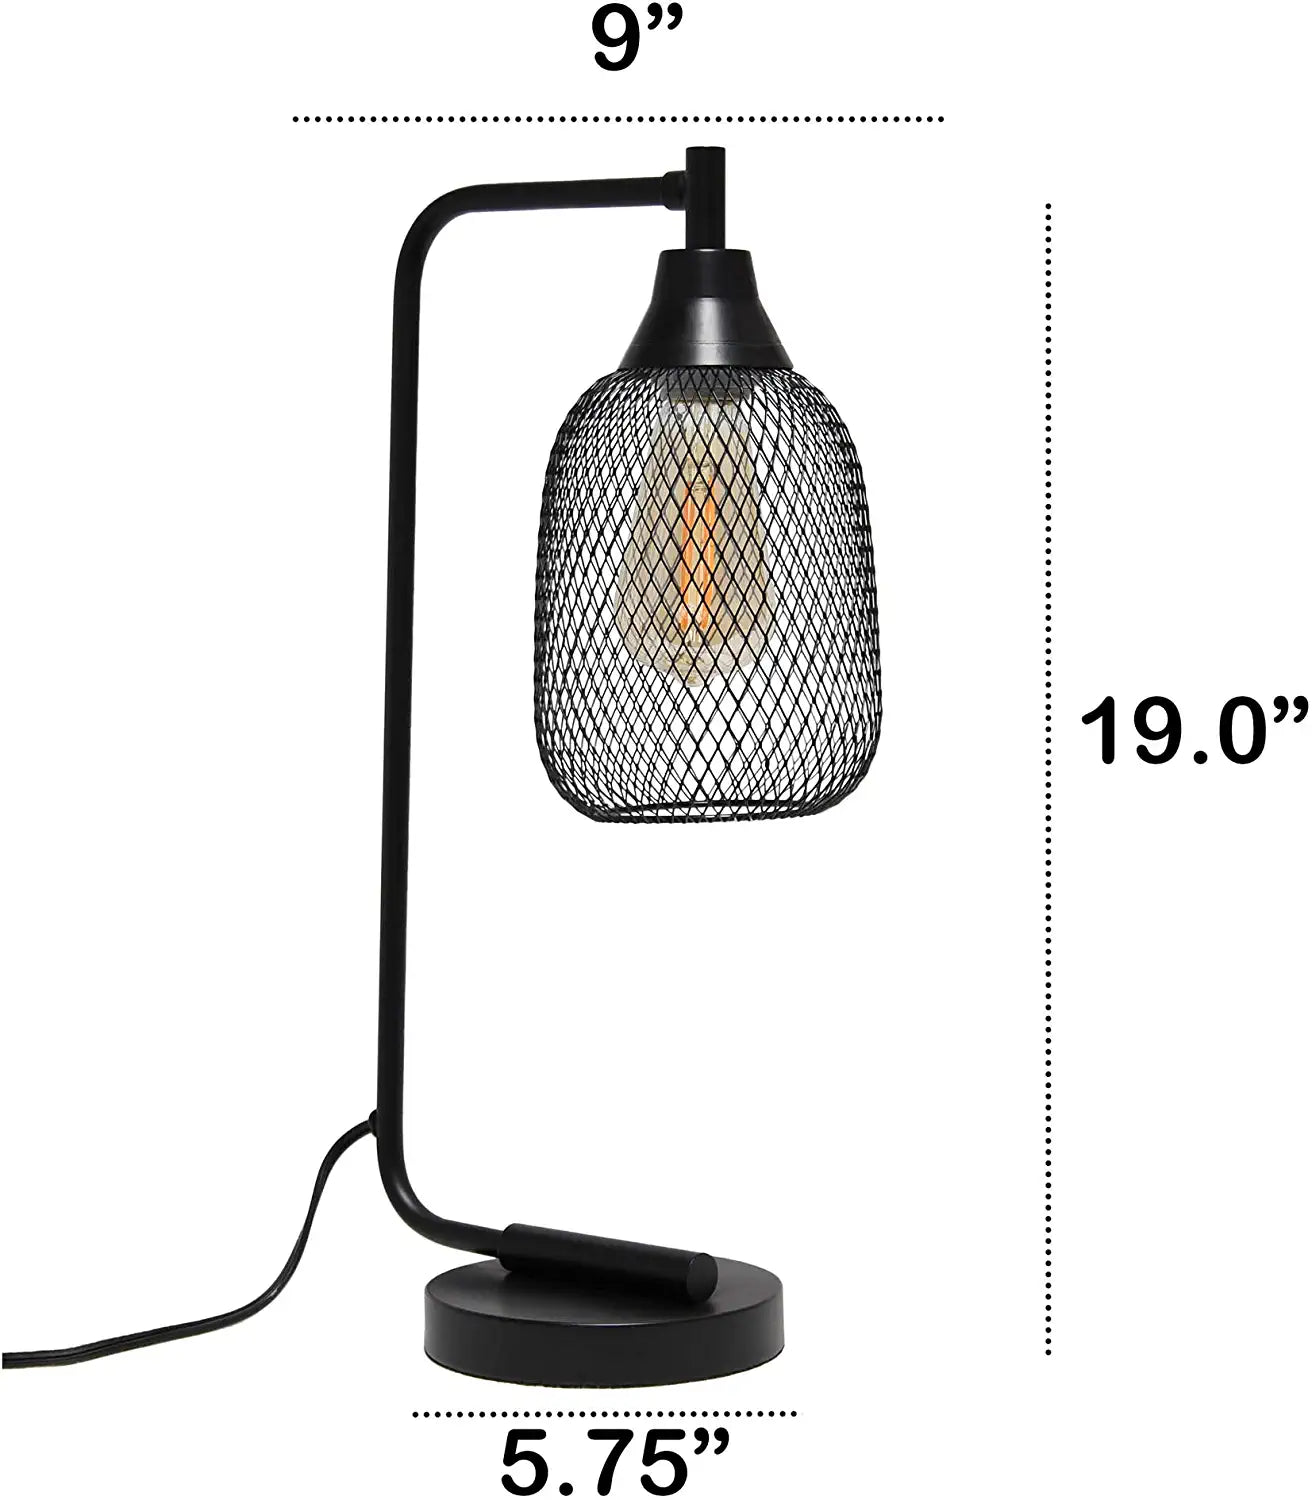 Lalia Home Industrial Office Desk Lamp with Wired Mesh Shade and Matte Black Finish